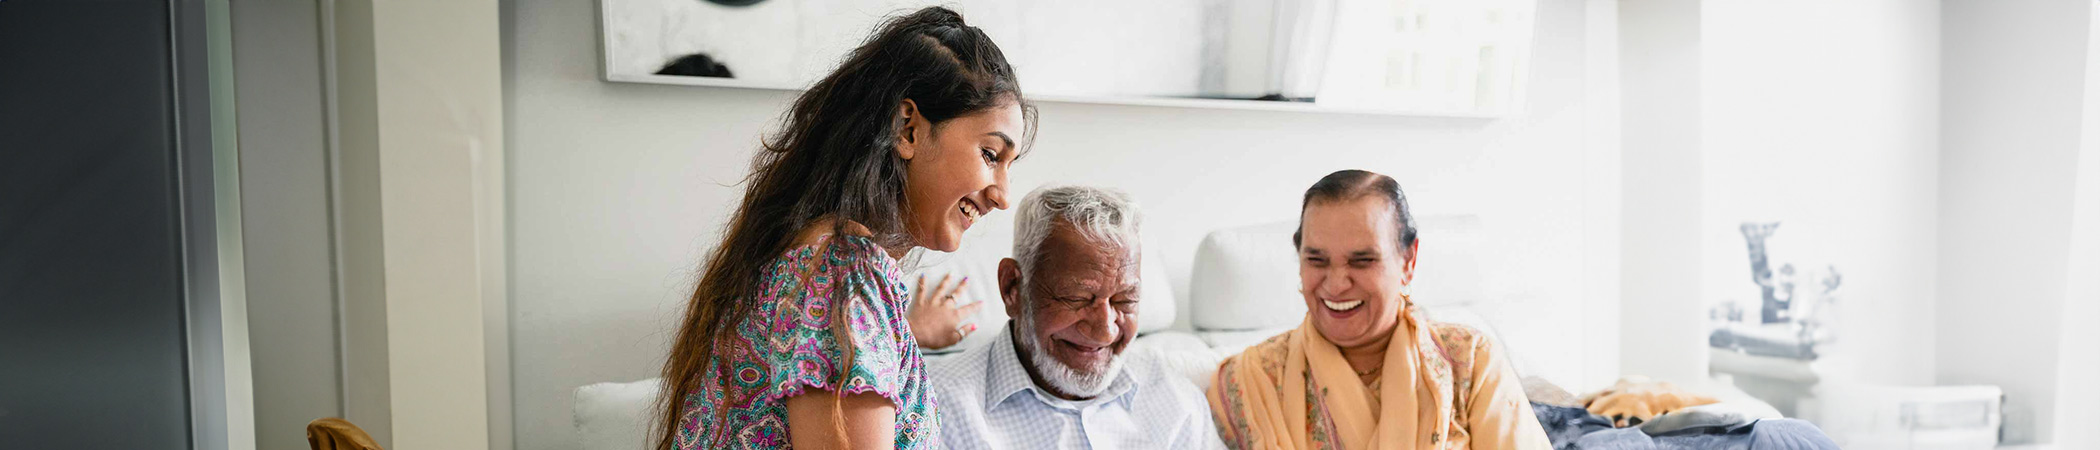 Young person smiling showing smiling older couple their mobile phone